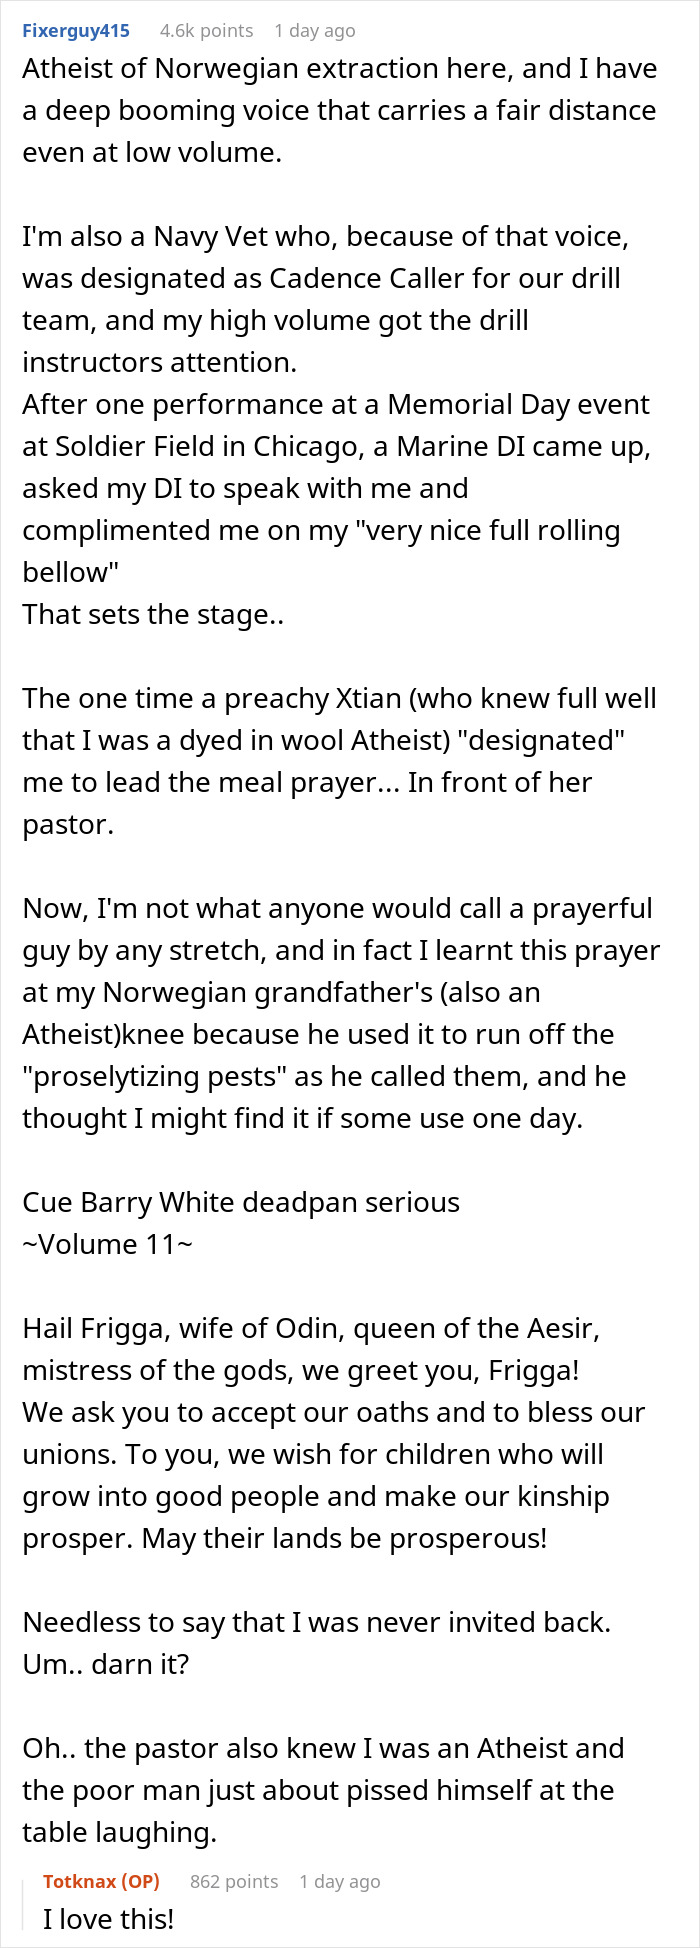 Atheist Guy Fights Fire With Fire By Saying A Prayer To Another God After MIL Forces Him To Say Grace